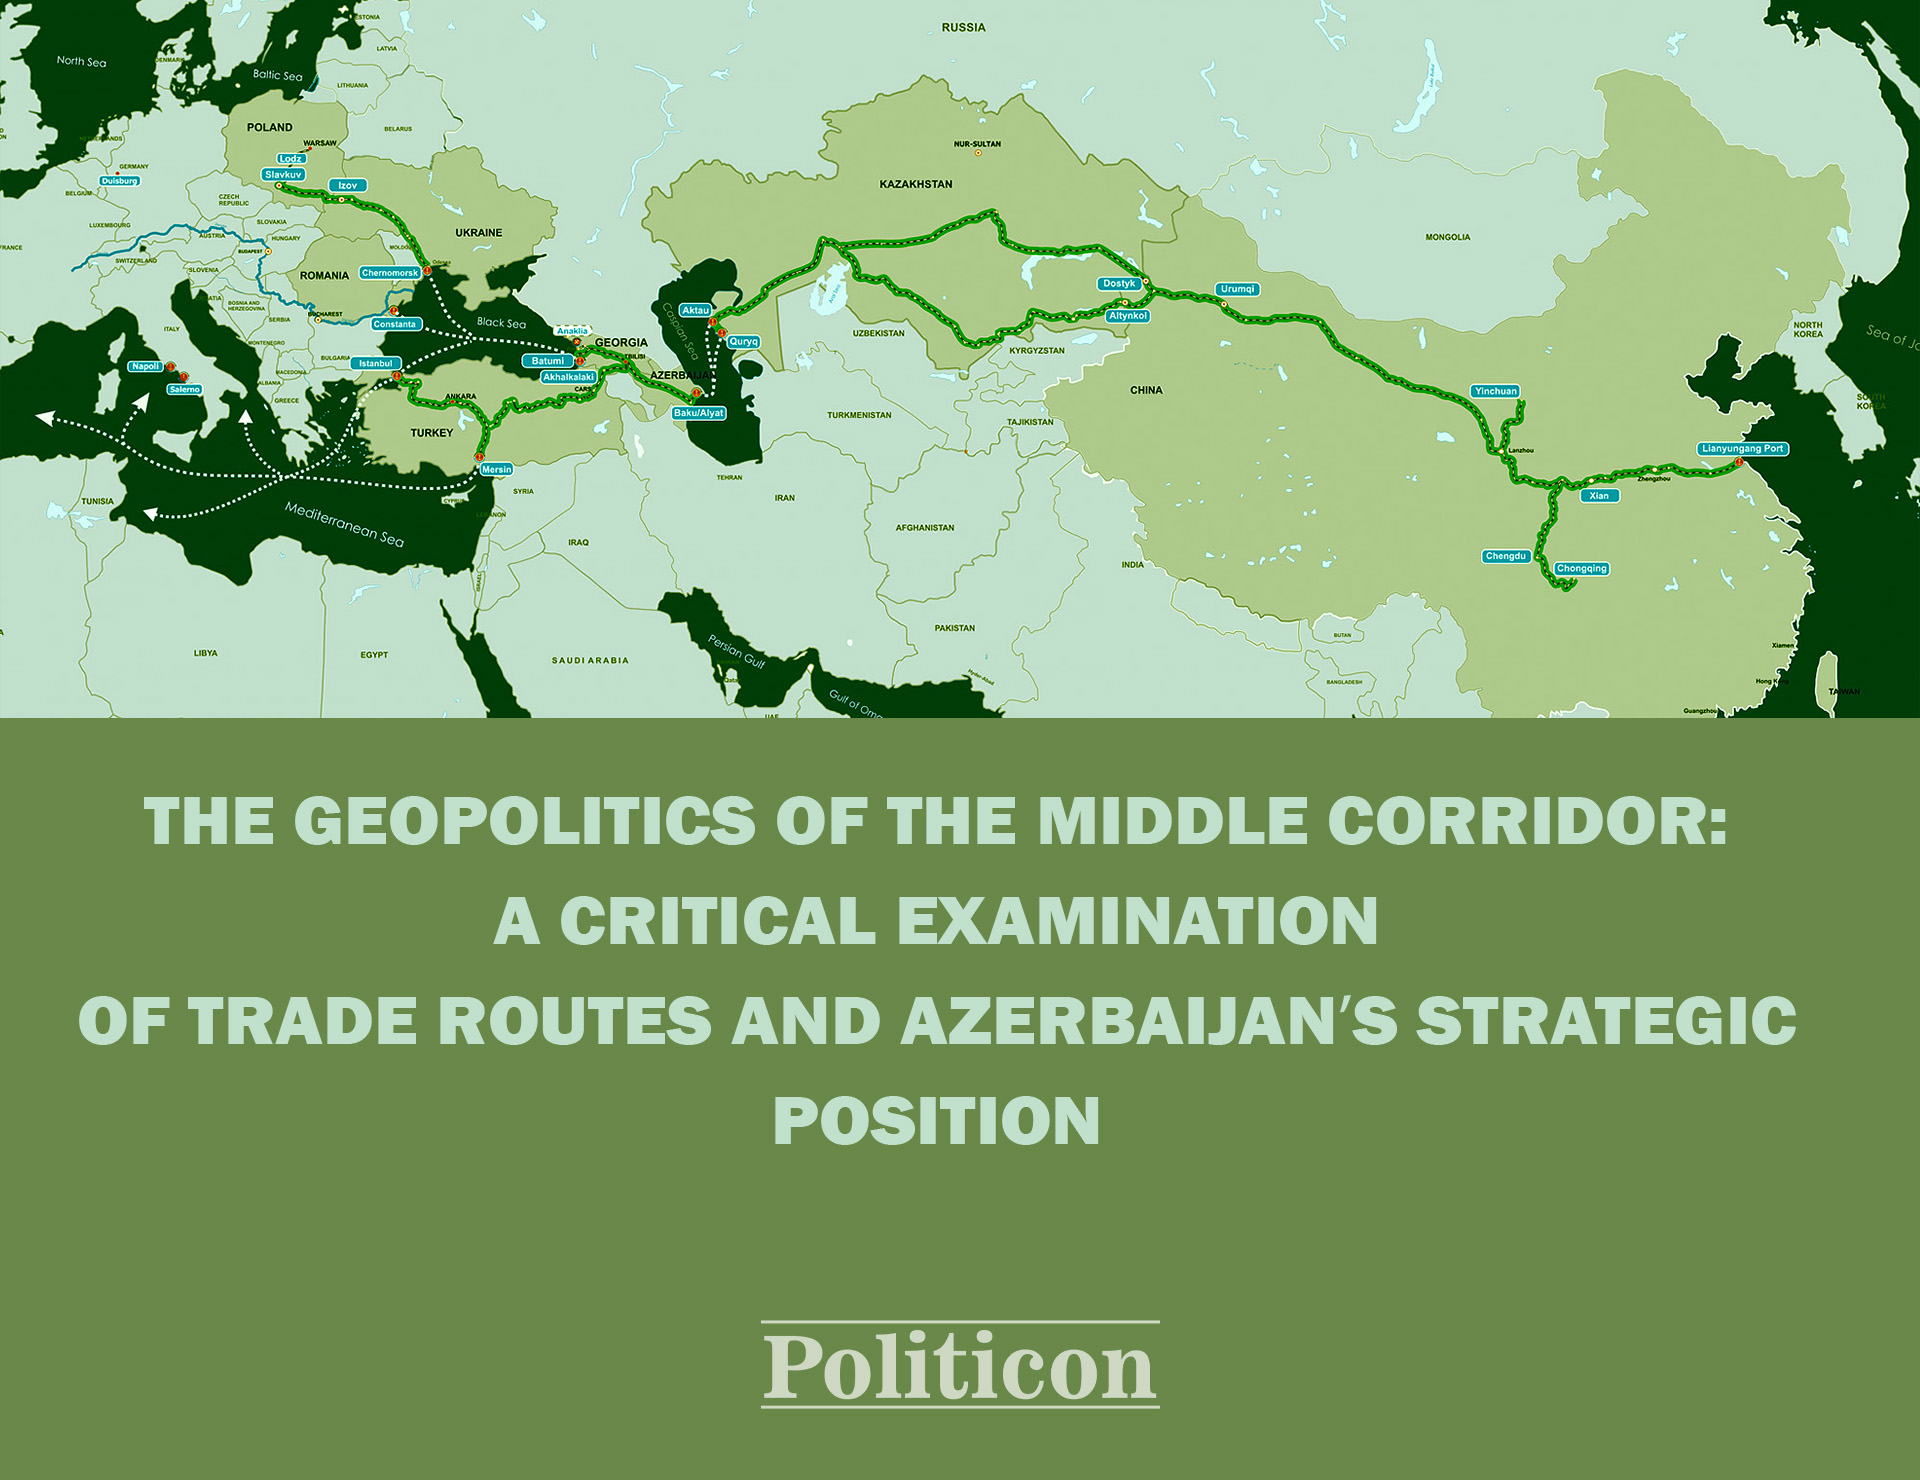 The Geopolitics of the Middle Corridor: A Critical Examination of Trade Routes and Azerbaijan's Strategic Position